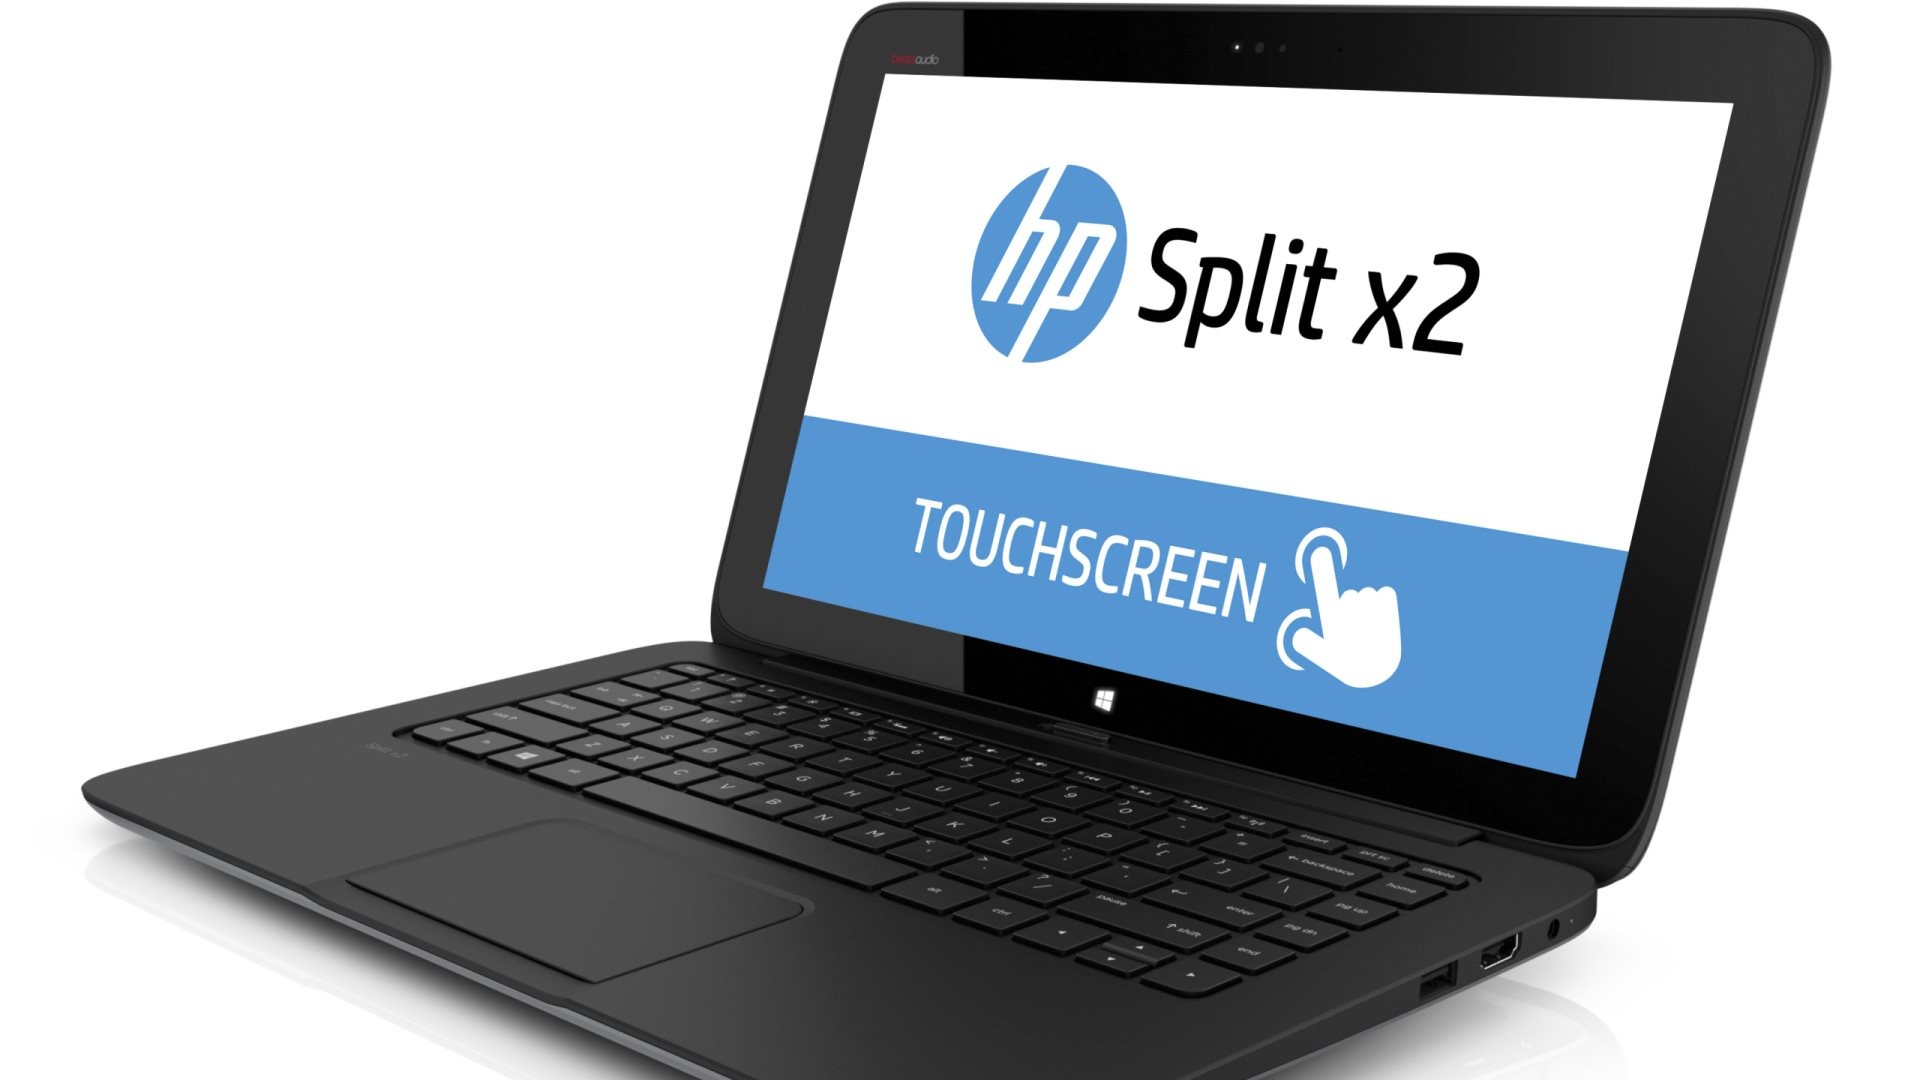 1920x1080 HD Wallpaper: Hewlett-Packard Split x2 tablet notebook has a 2-in-1 design  to easily go from a powerful notebook to a portable tablet